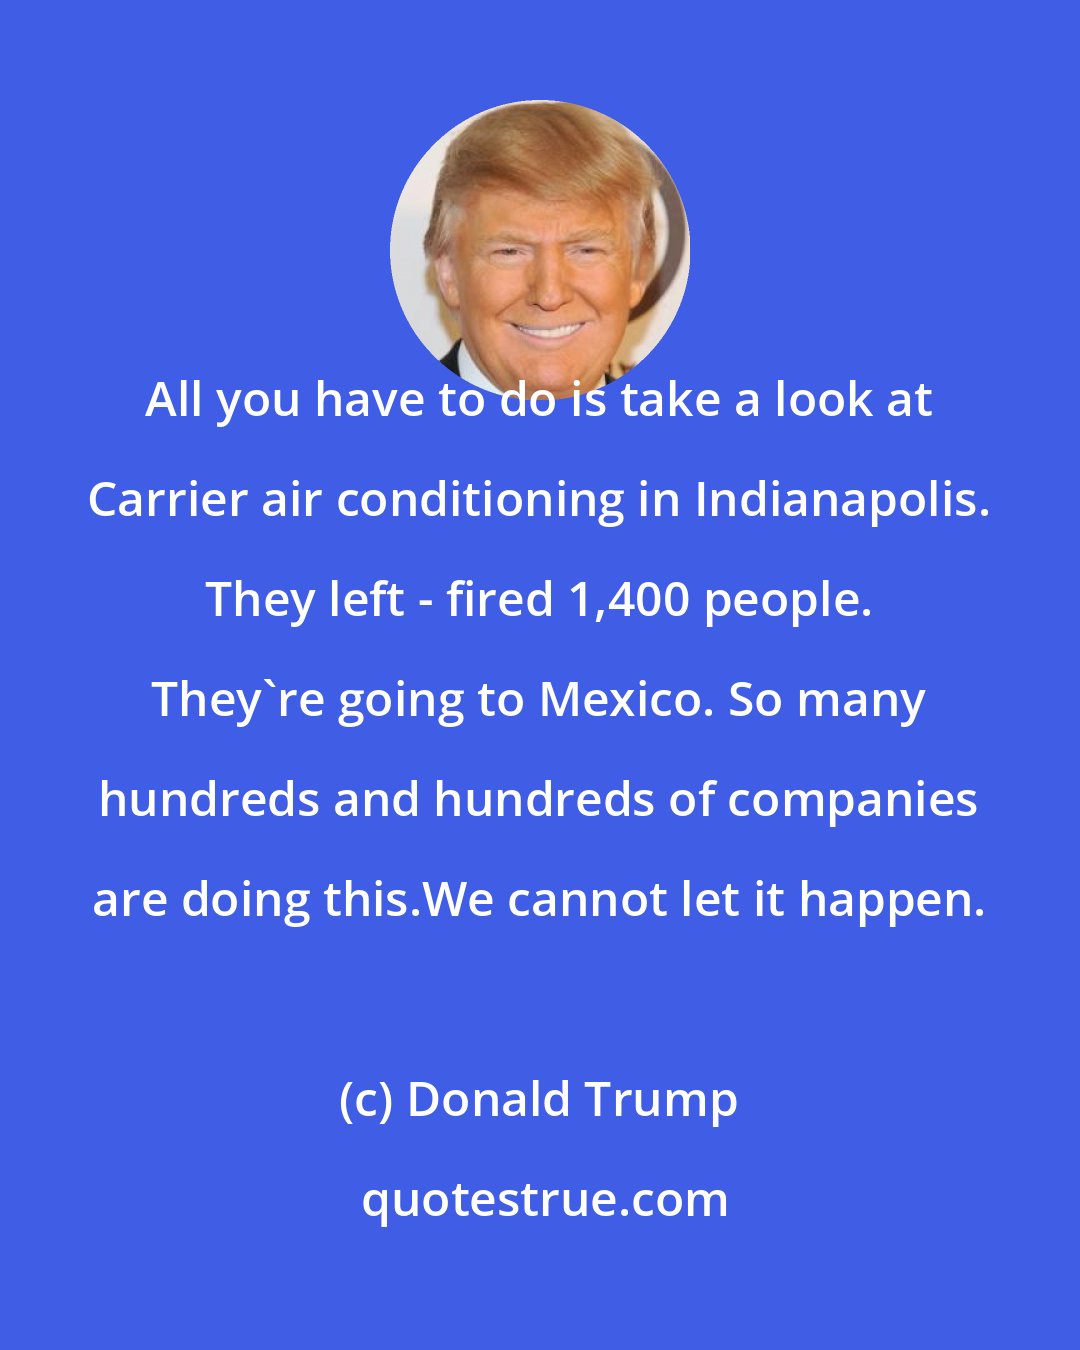 Donald Trump: All you have to do is take a look at Carrier air conditioning in Indianapolis. They left - fired 1,400 people. They're going to Mexico. So many hundreds and hundreds of companies are doing this.We cannot let it happen.